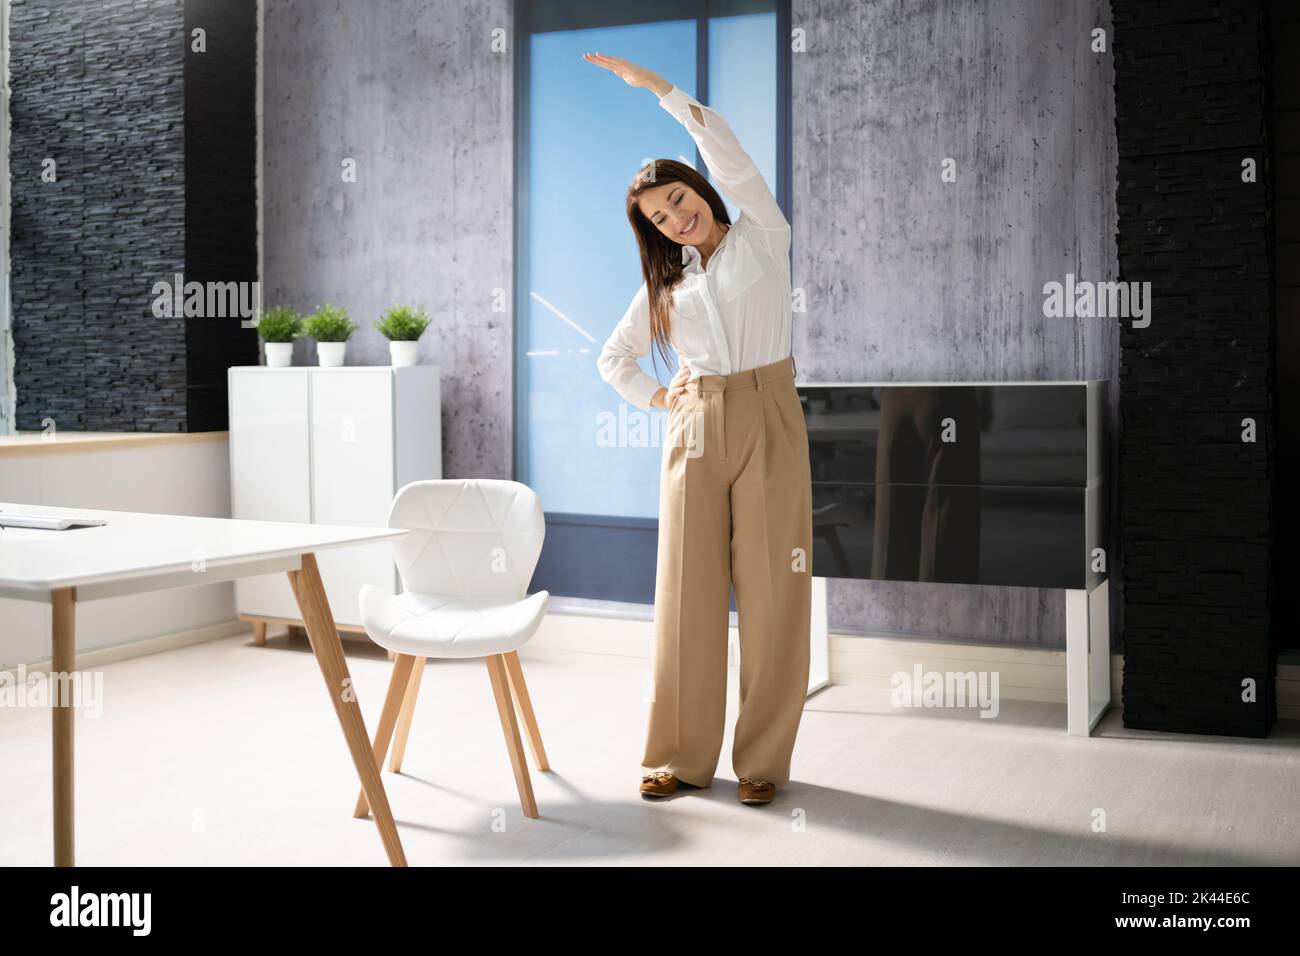 Stretching Office Workout. Desk Stretch Exercise At Workplace Stock Photo